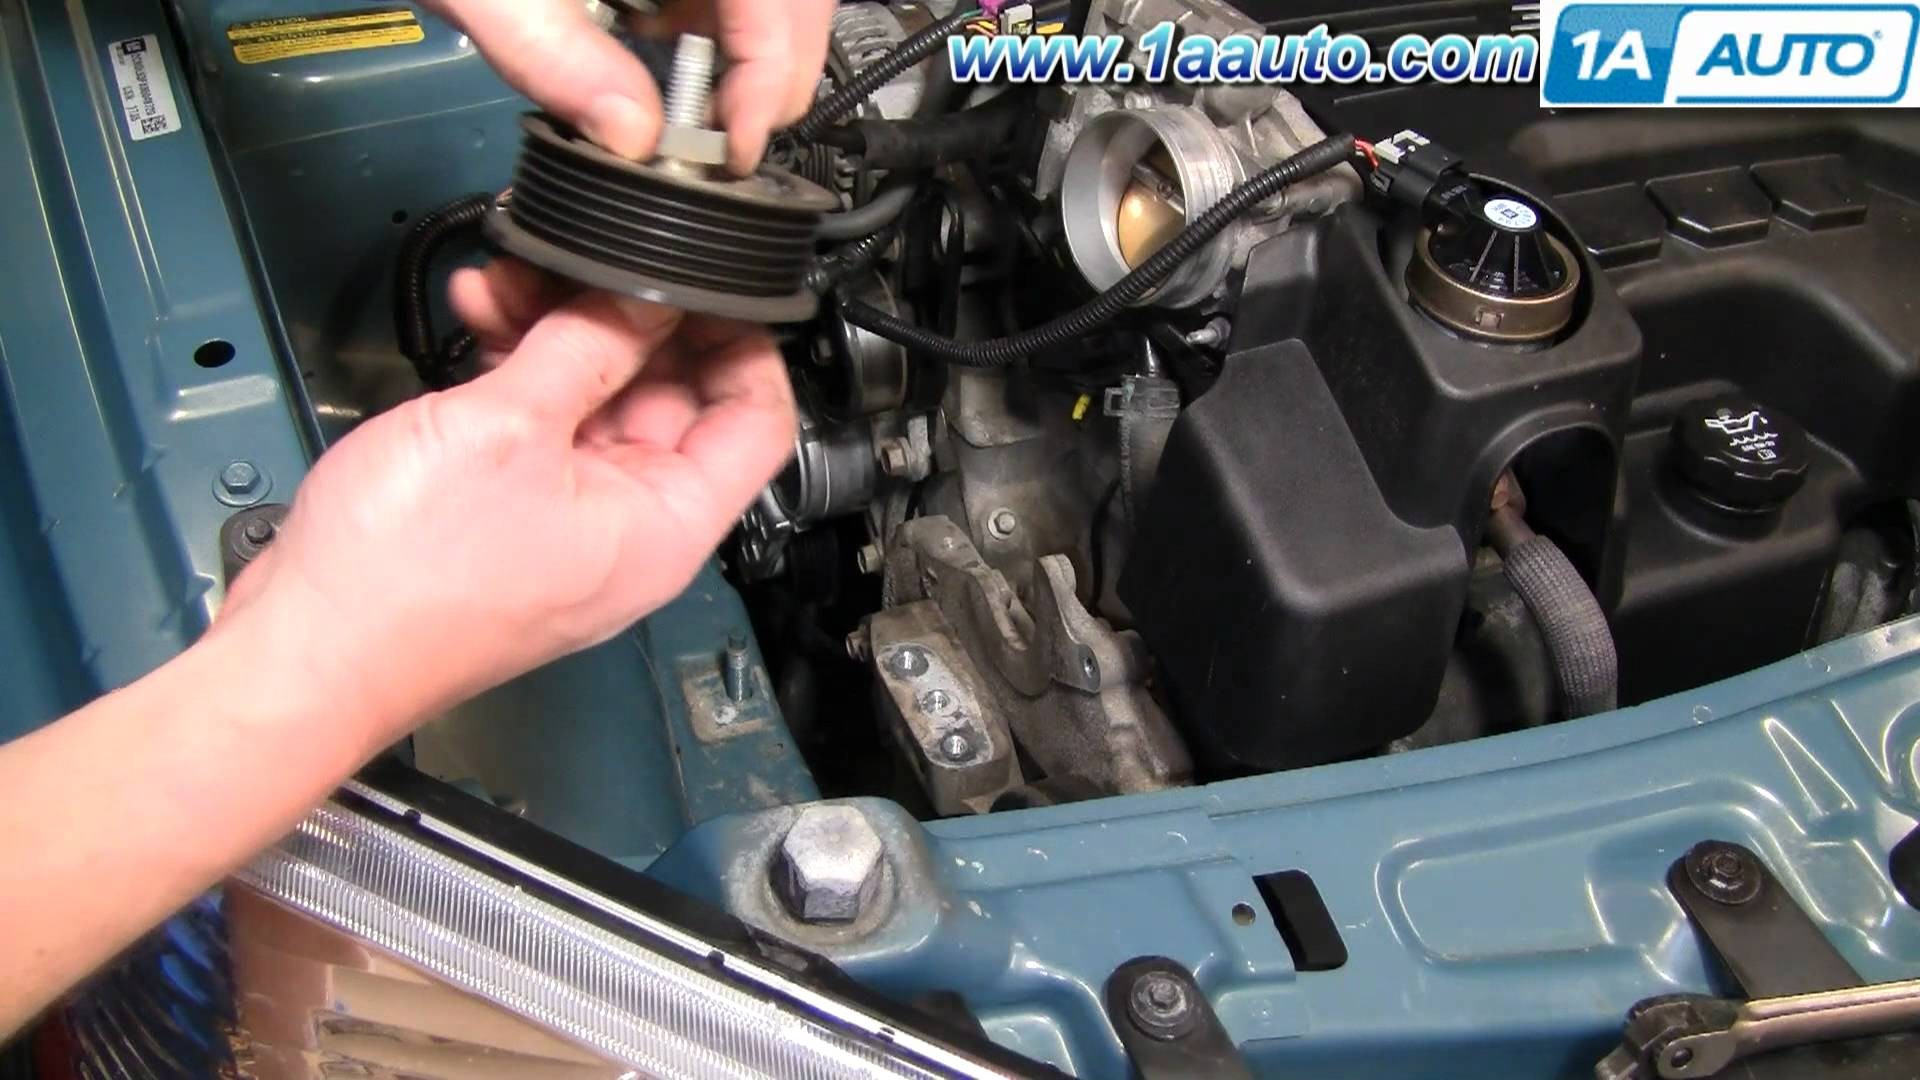 2007 Chevy Equinox Engine Diagram How to Install Replace Upper Idler Pulley Chevy Equinox 3 4l 05 09 Of 2007 Chevy Equinox Engine Diagram